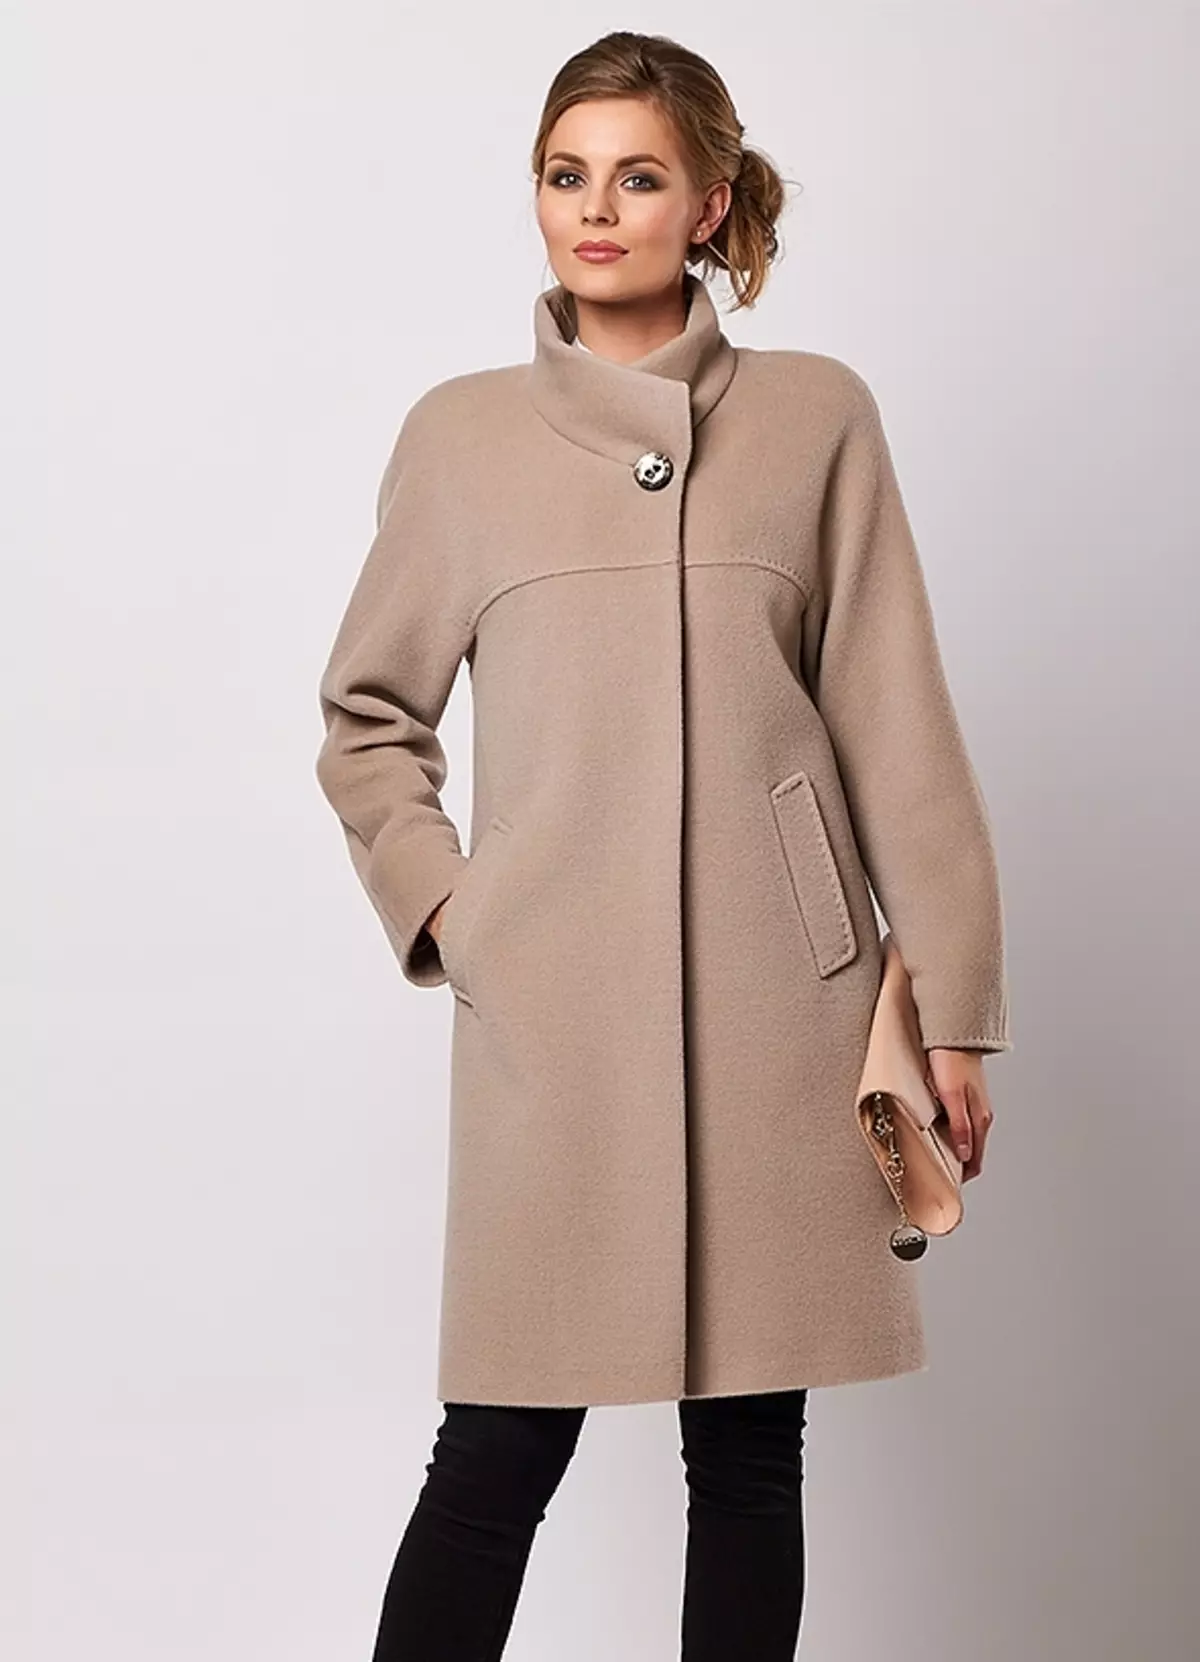 Personne Coat (30 larawan): Female luxury models from person 351_25